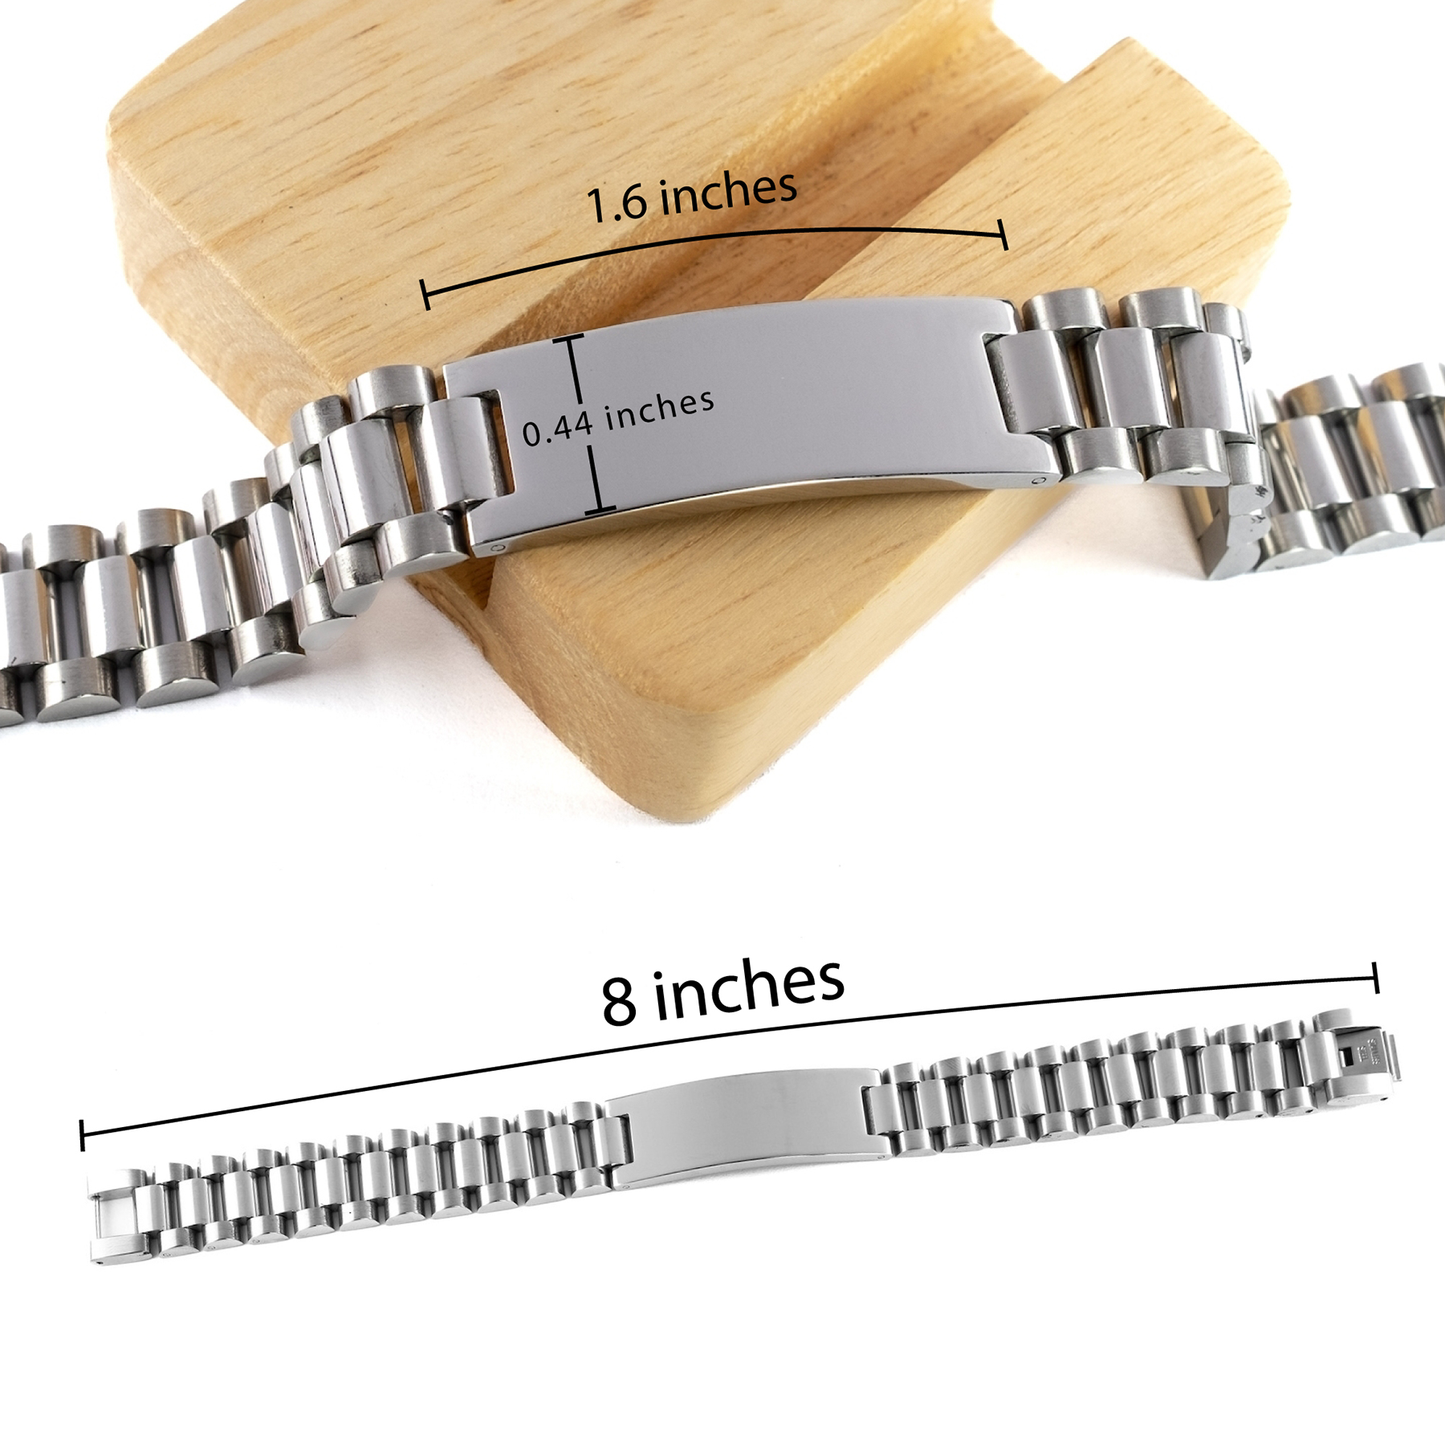 Grandpop Stainless Steel Bracelet - You will always have a special place in my heart - Engraved Gift for Grandpop on Birthday, Christmas, and Graduation - Meaningful and Inspirational Jewelry for Grandpop